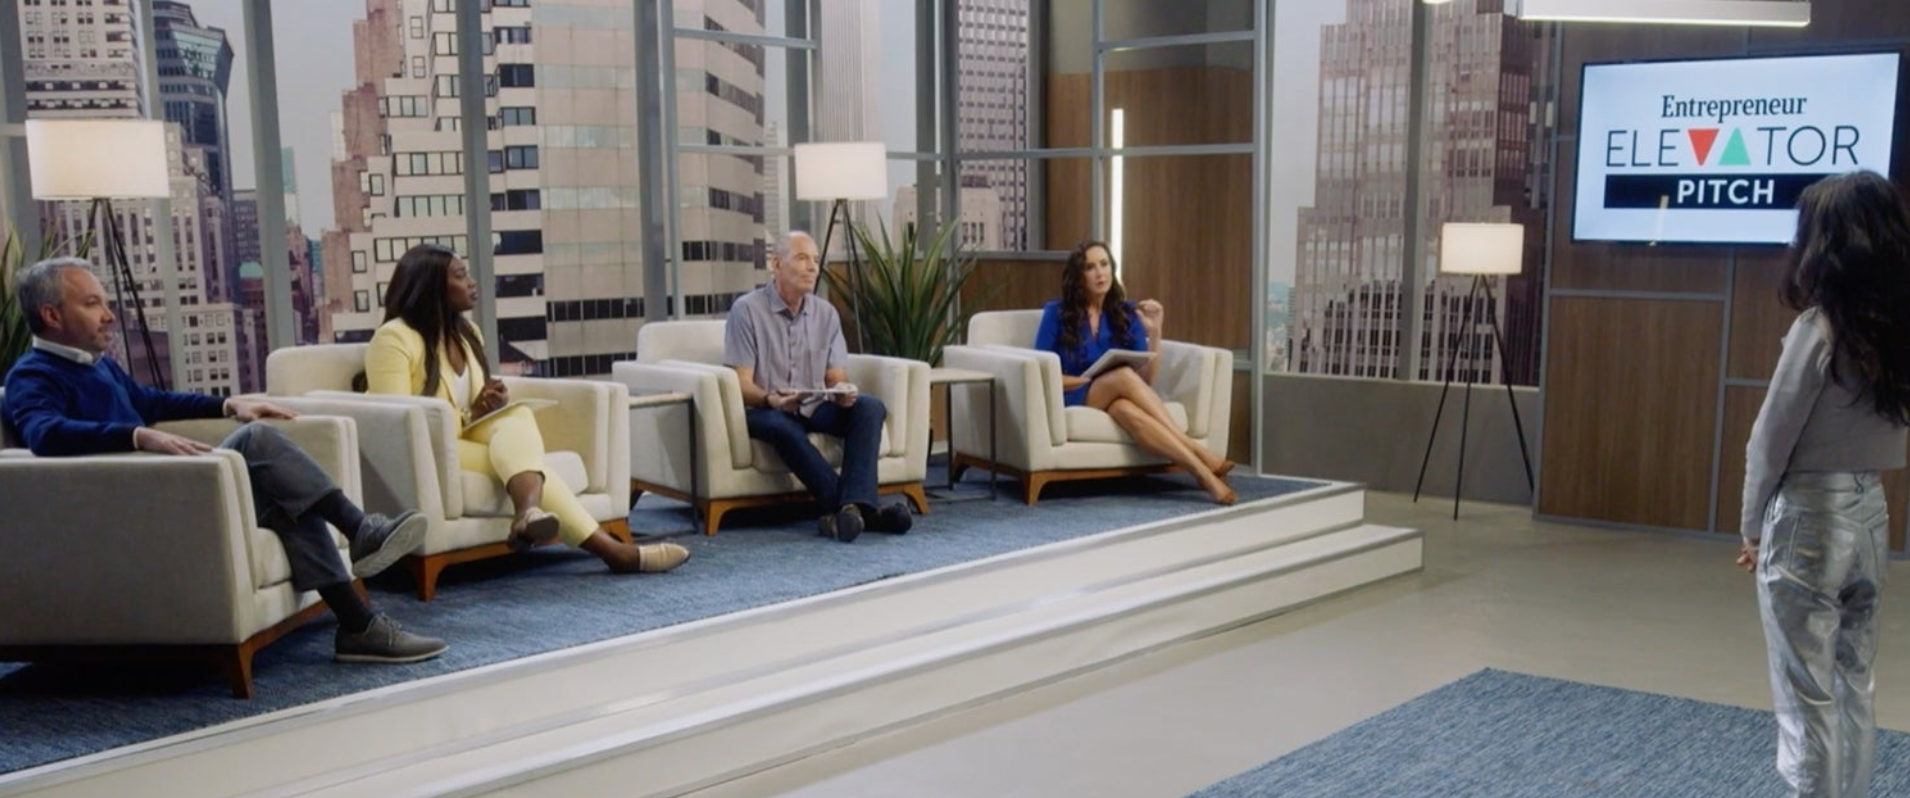 Entrepreneur's reality show 'Elevator Pitch' features Florida